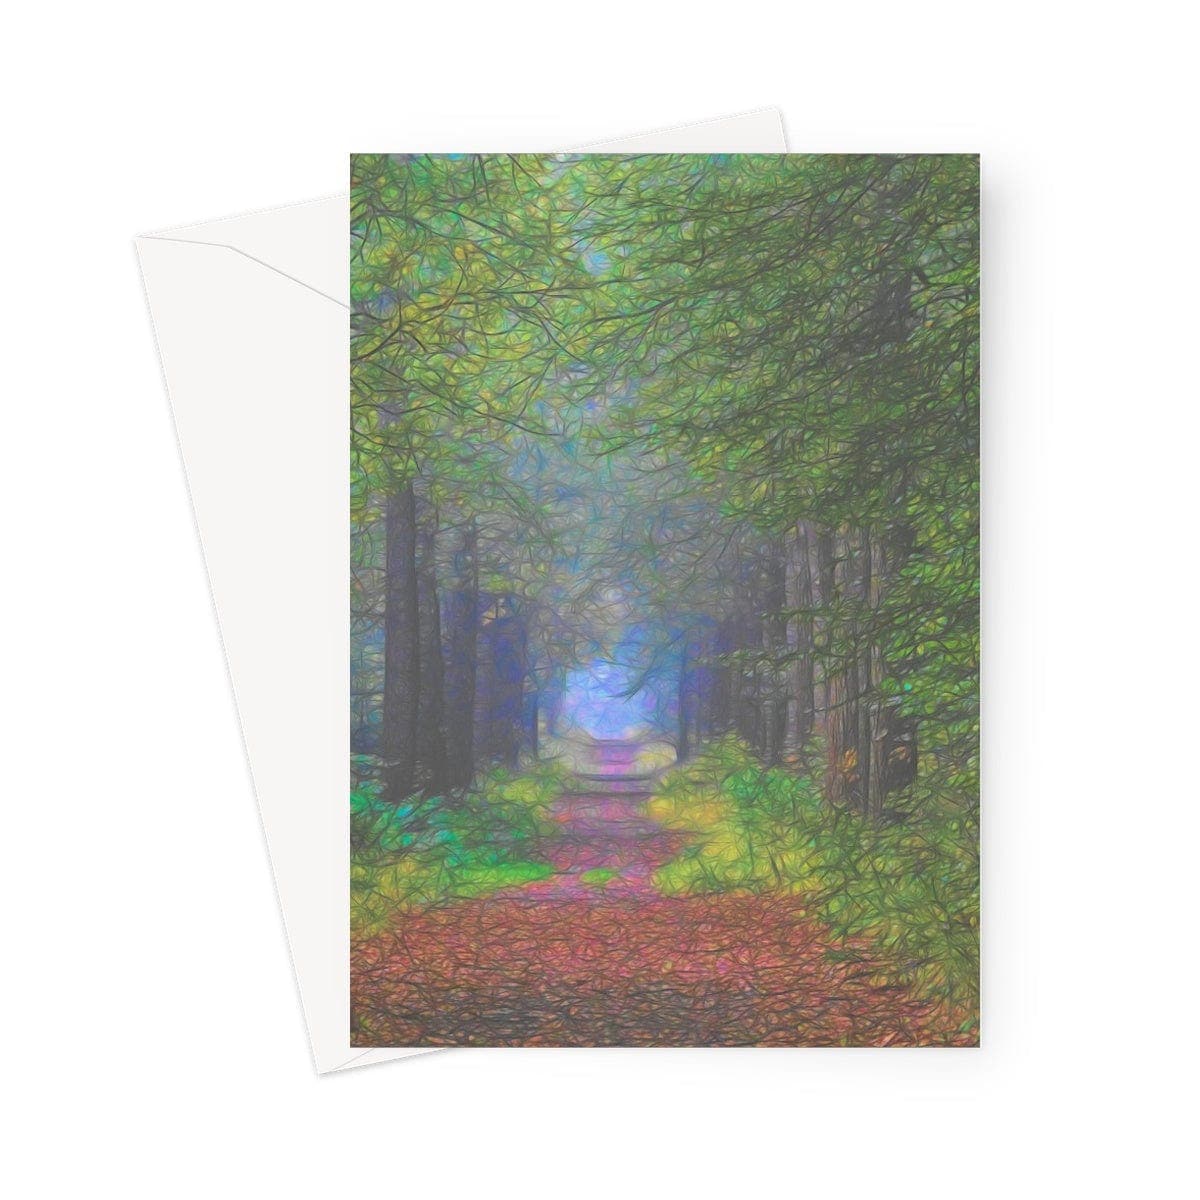 Forest lane, Art on a Greeting Card, by Sensus Studio